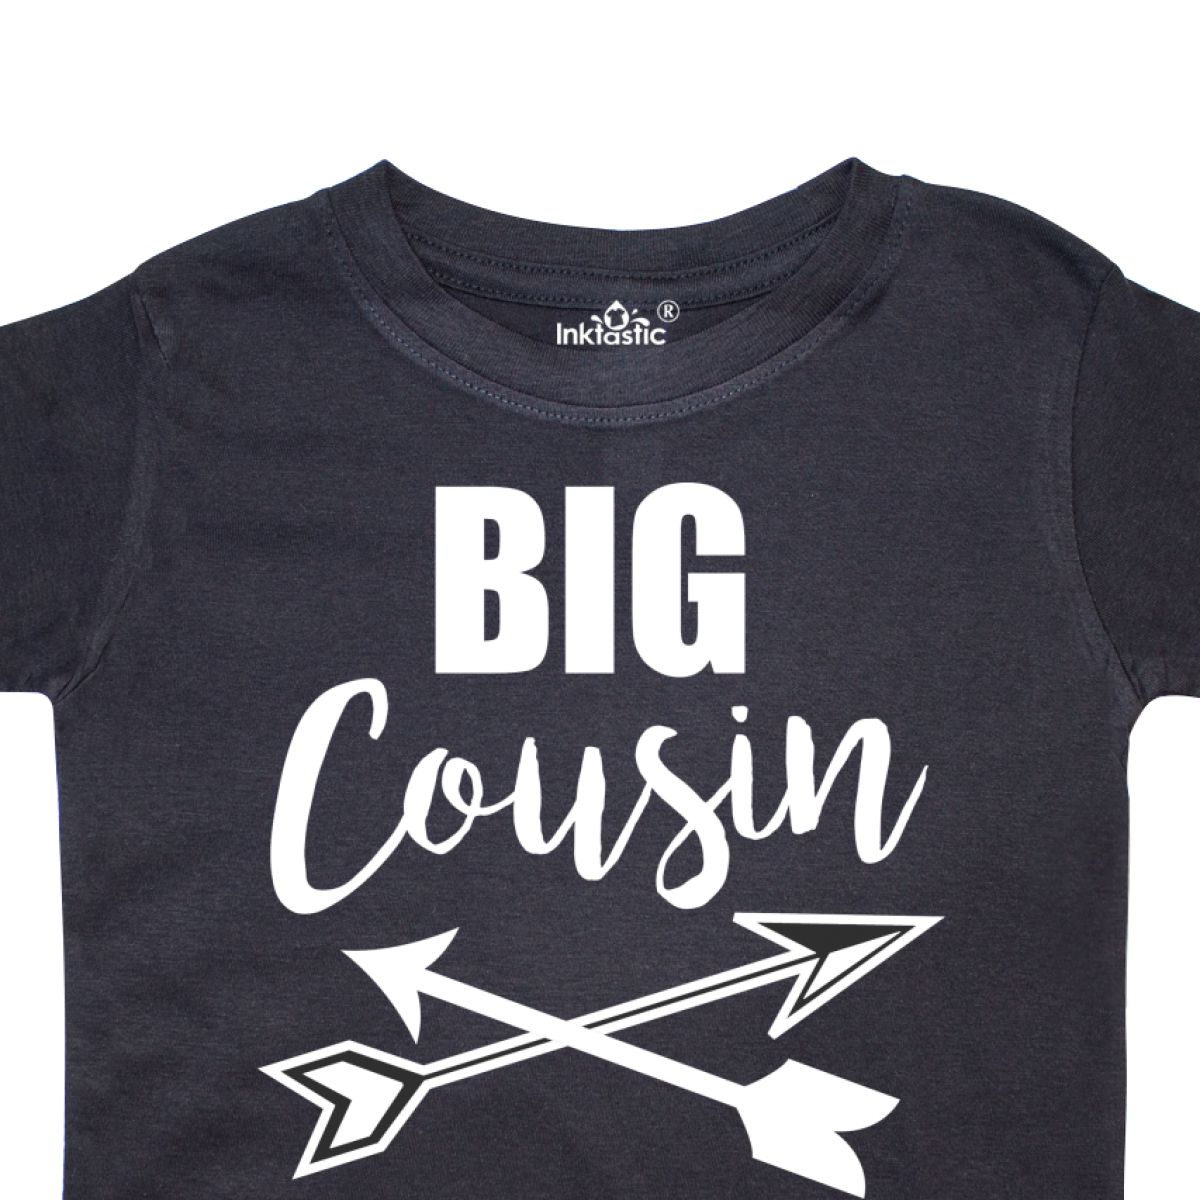 cousin t shirts toddlers